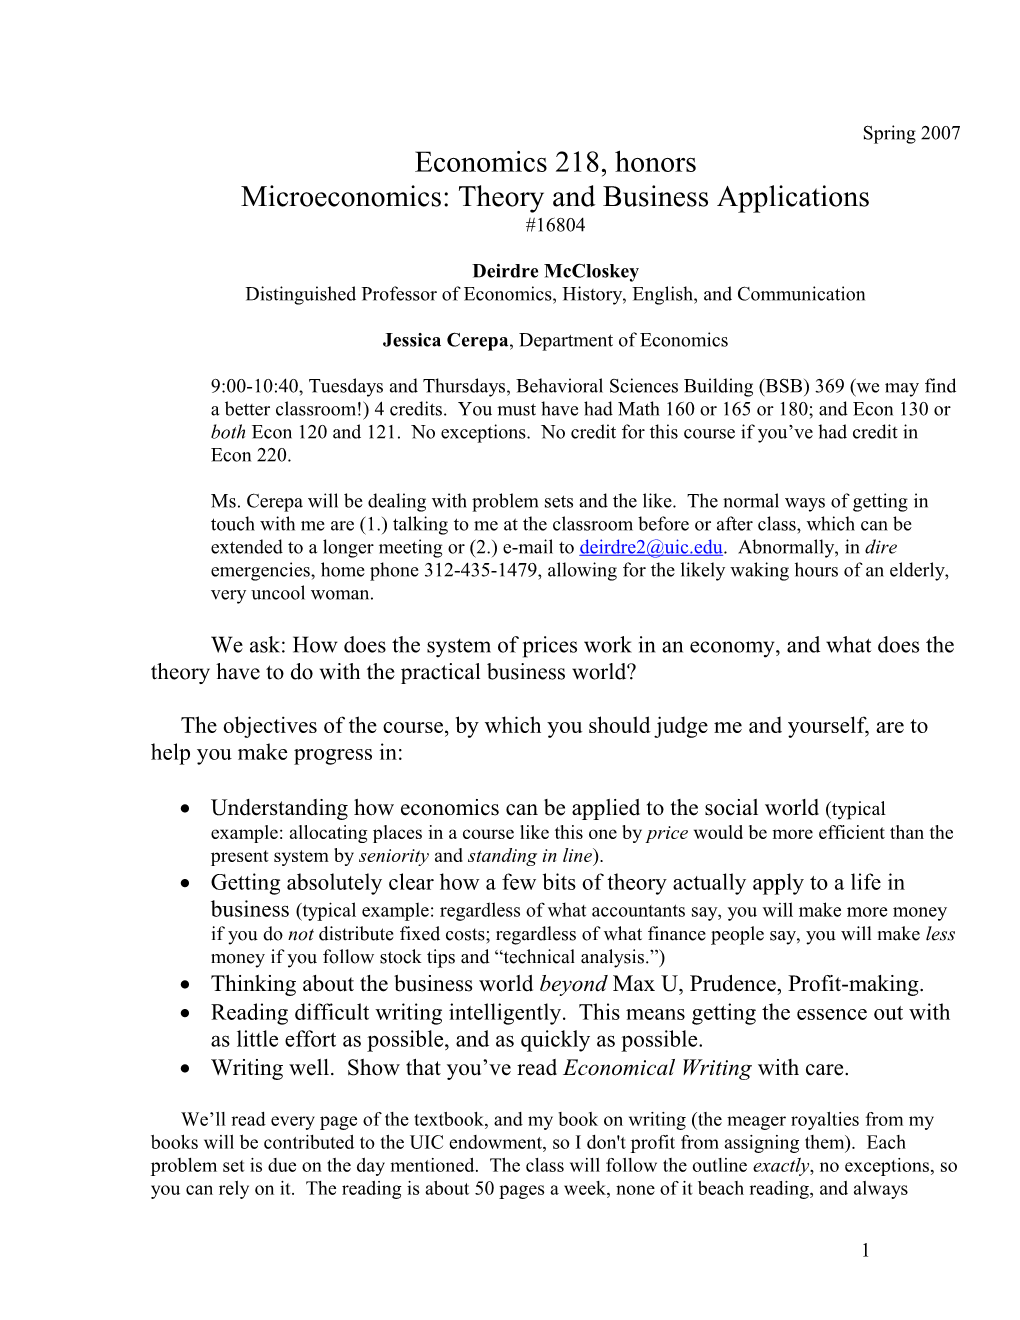 Microeconomics: Theory and Business Applications